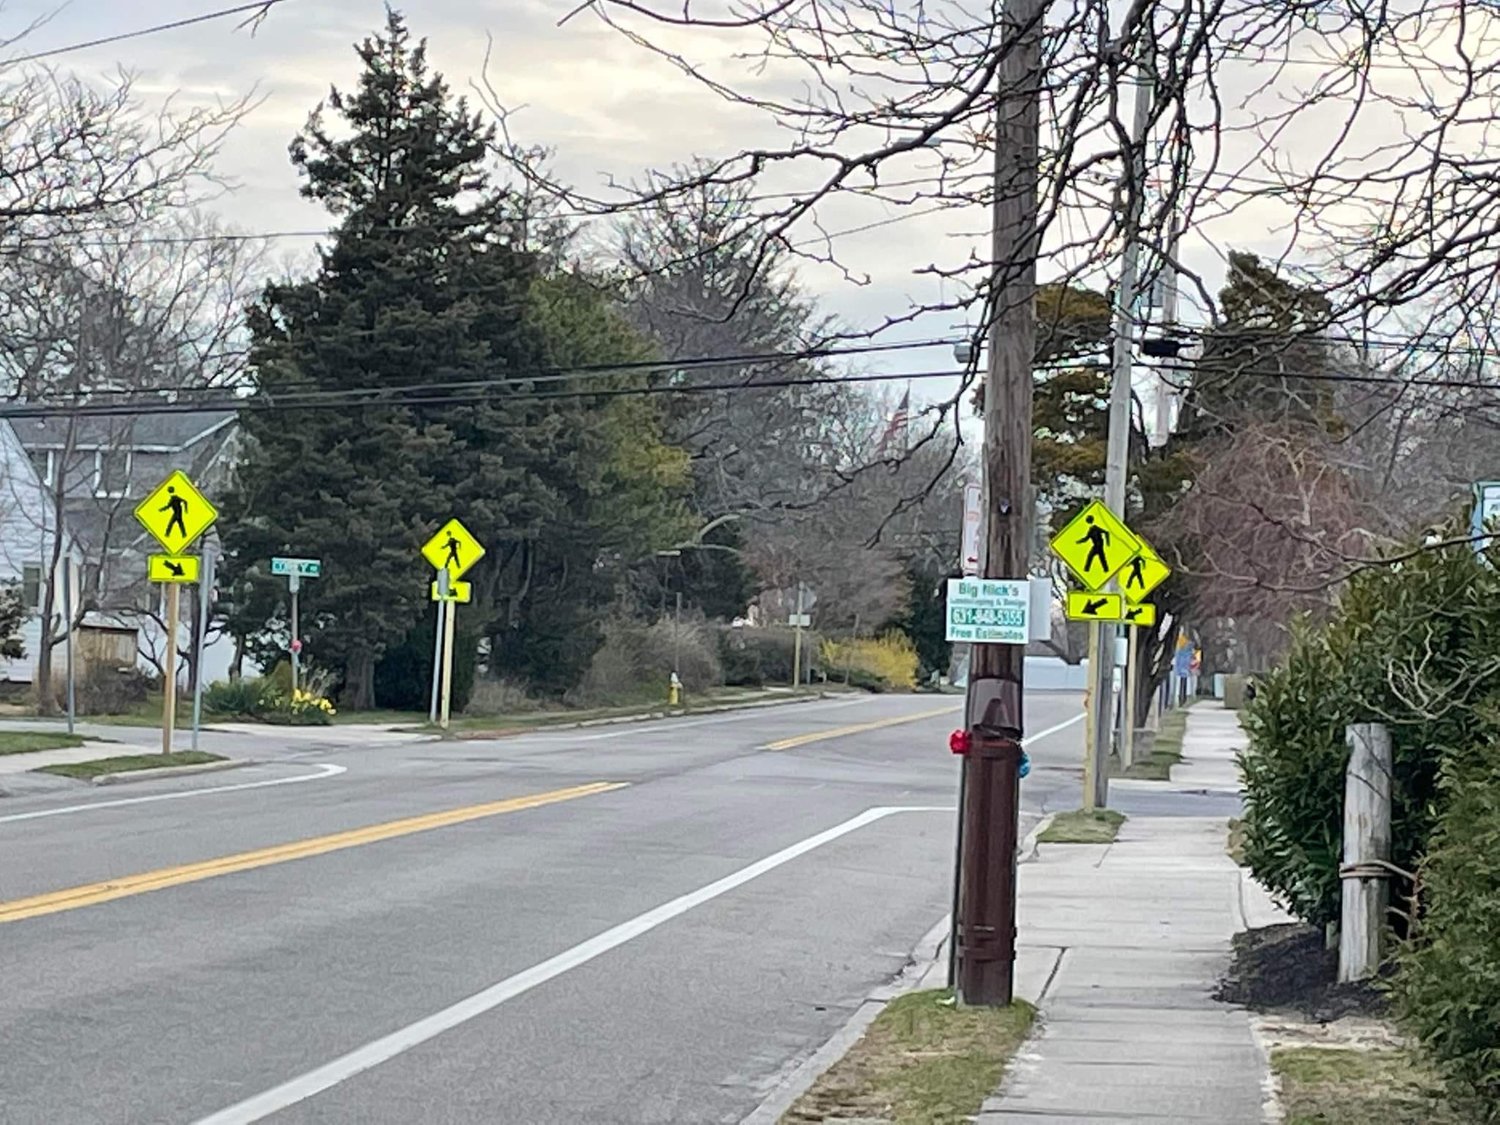 Long discussed as a hazardous and dangerous intersection, the four corners of Corey Avenue and Montauk Highway received new signage for pedestrians and motorists.